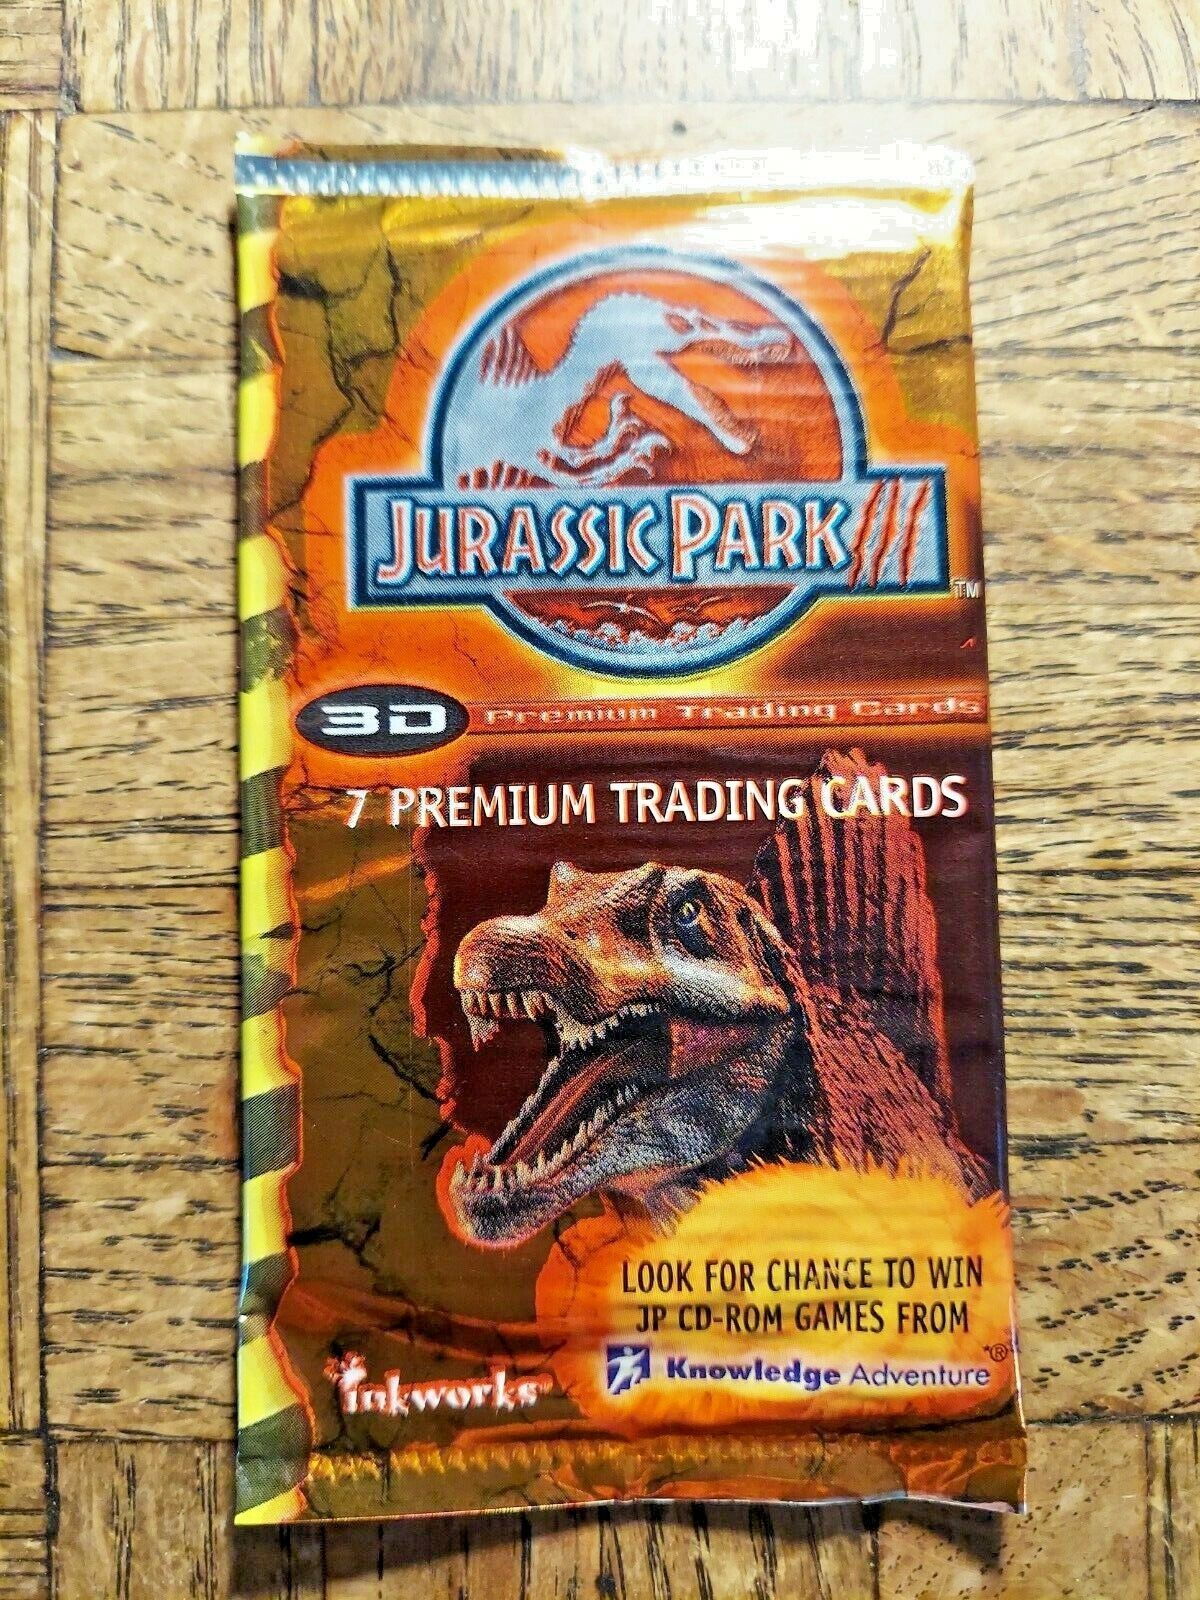 JURASSIC PARK lll TRADING CARDS IN 3D 